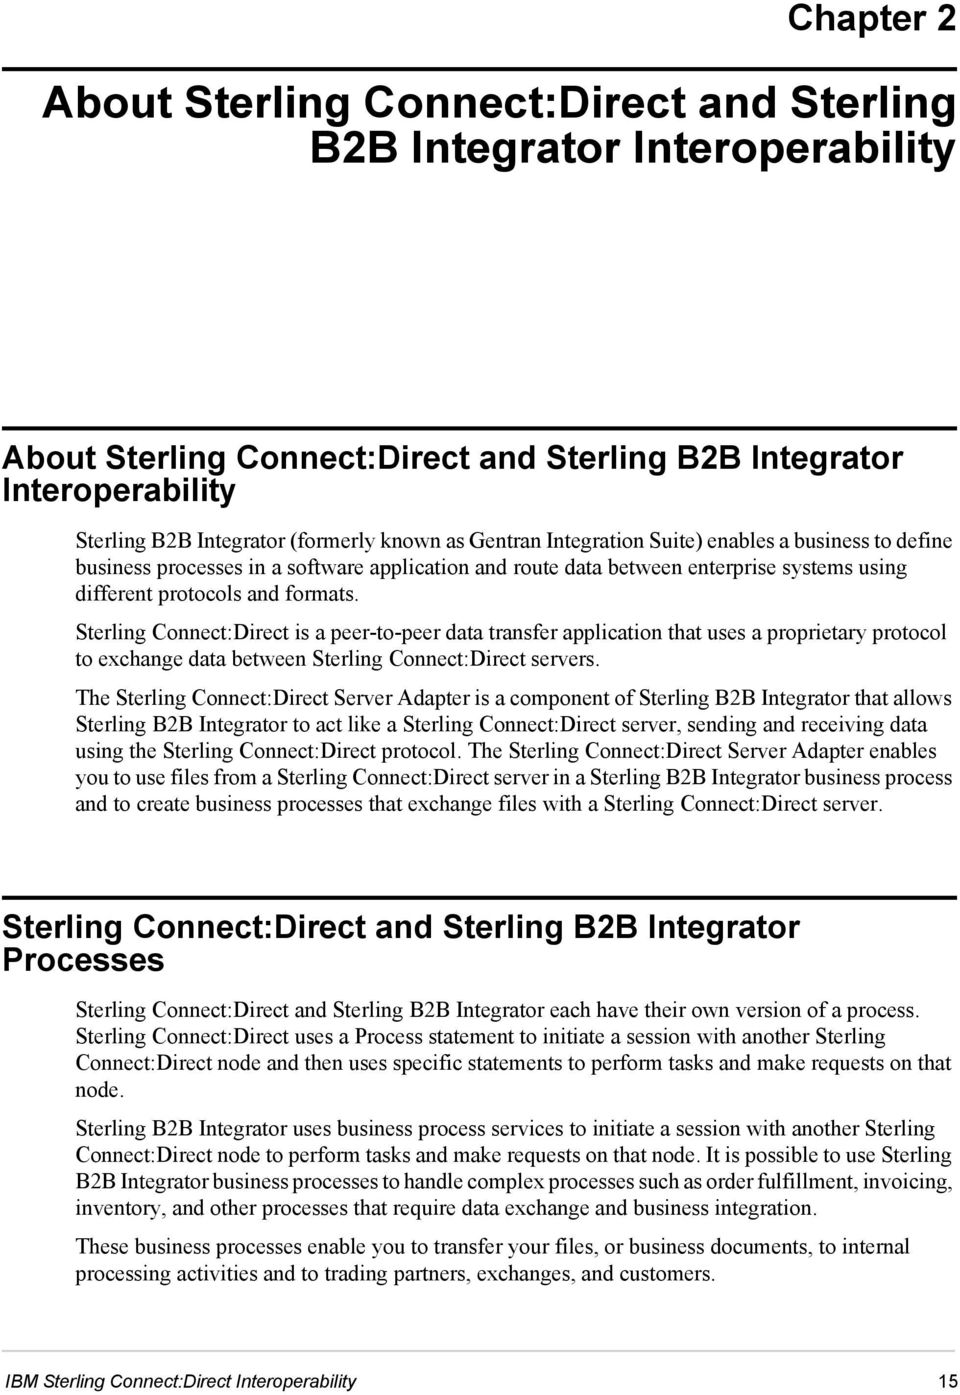 Sterling Connect:Direct is a peer-to-peer data transfer application that uses a proprietary protocol to exchange data between Sterling Connect:Direct servers.